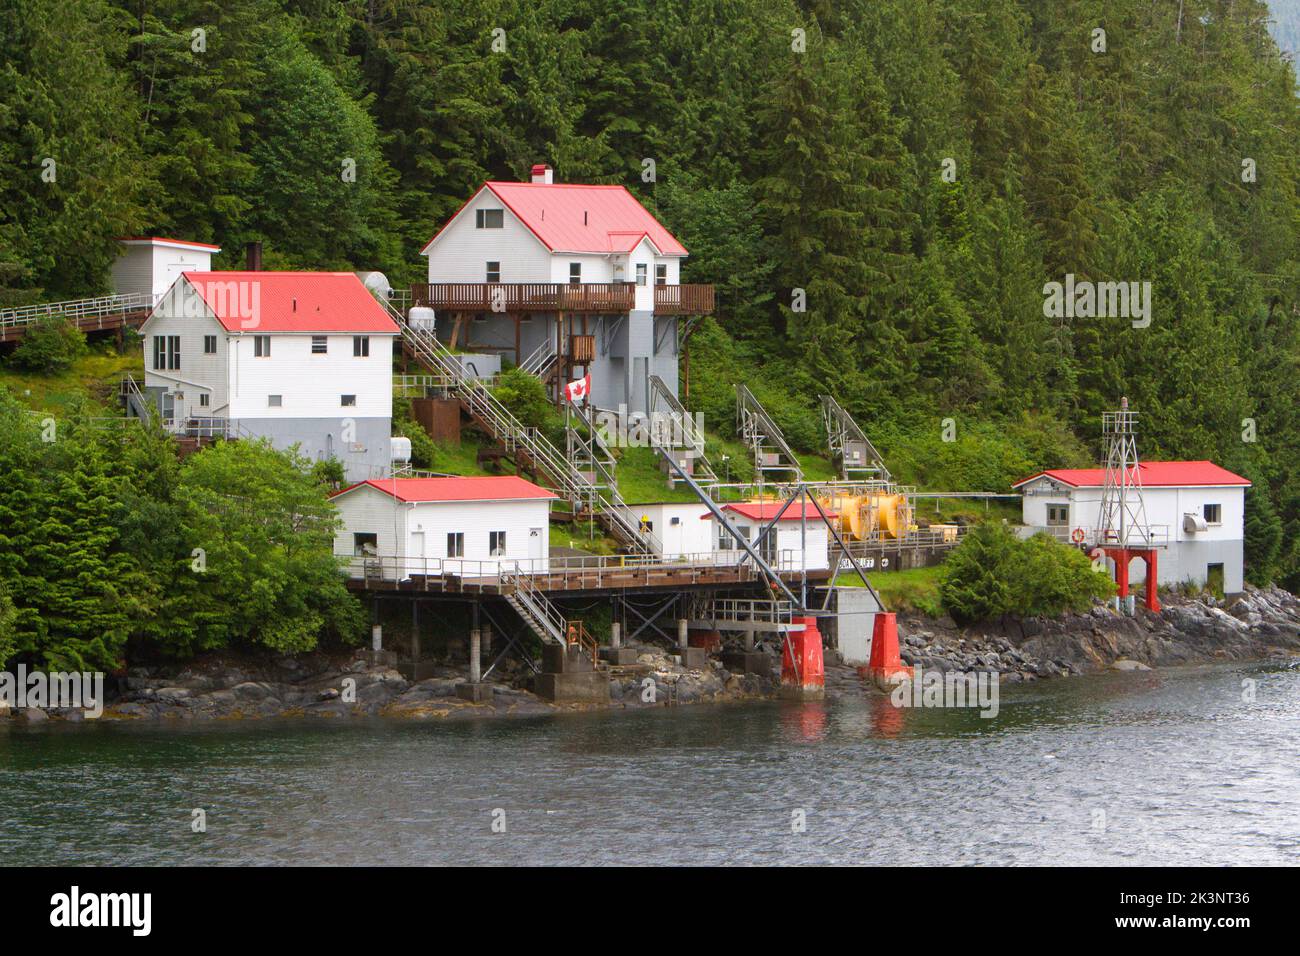 Boat Bluff Lighthouse near Klemtu, Sarah Island, in Tolmie Channel on the Inside Passage of British Columbia, Canada, established in 1907. Stock Photo